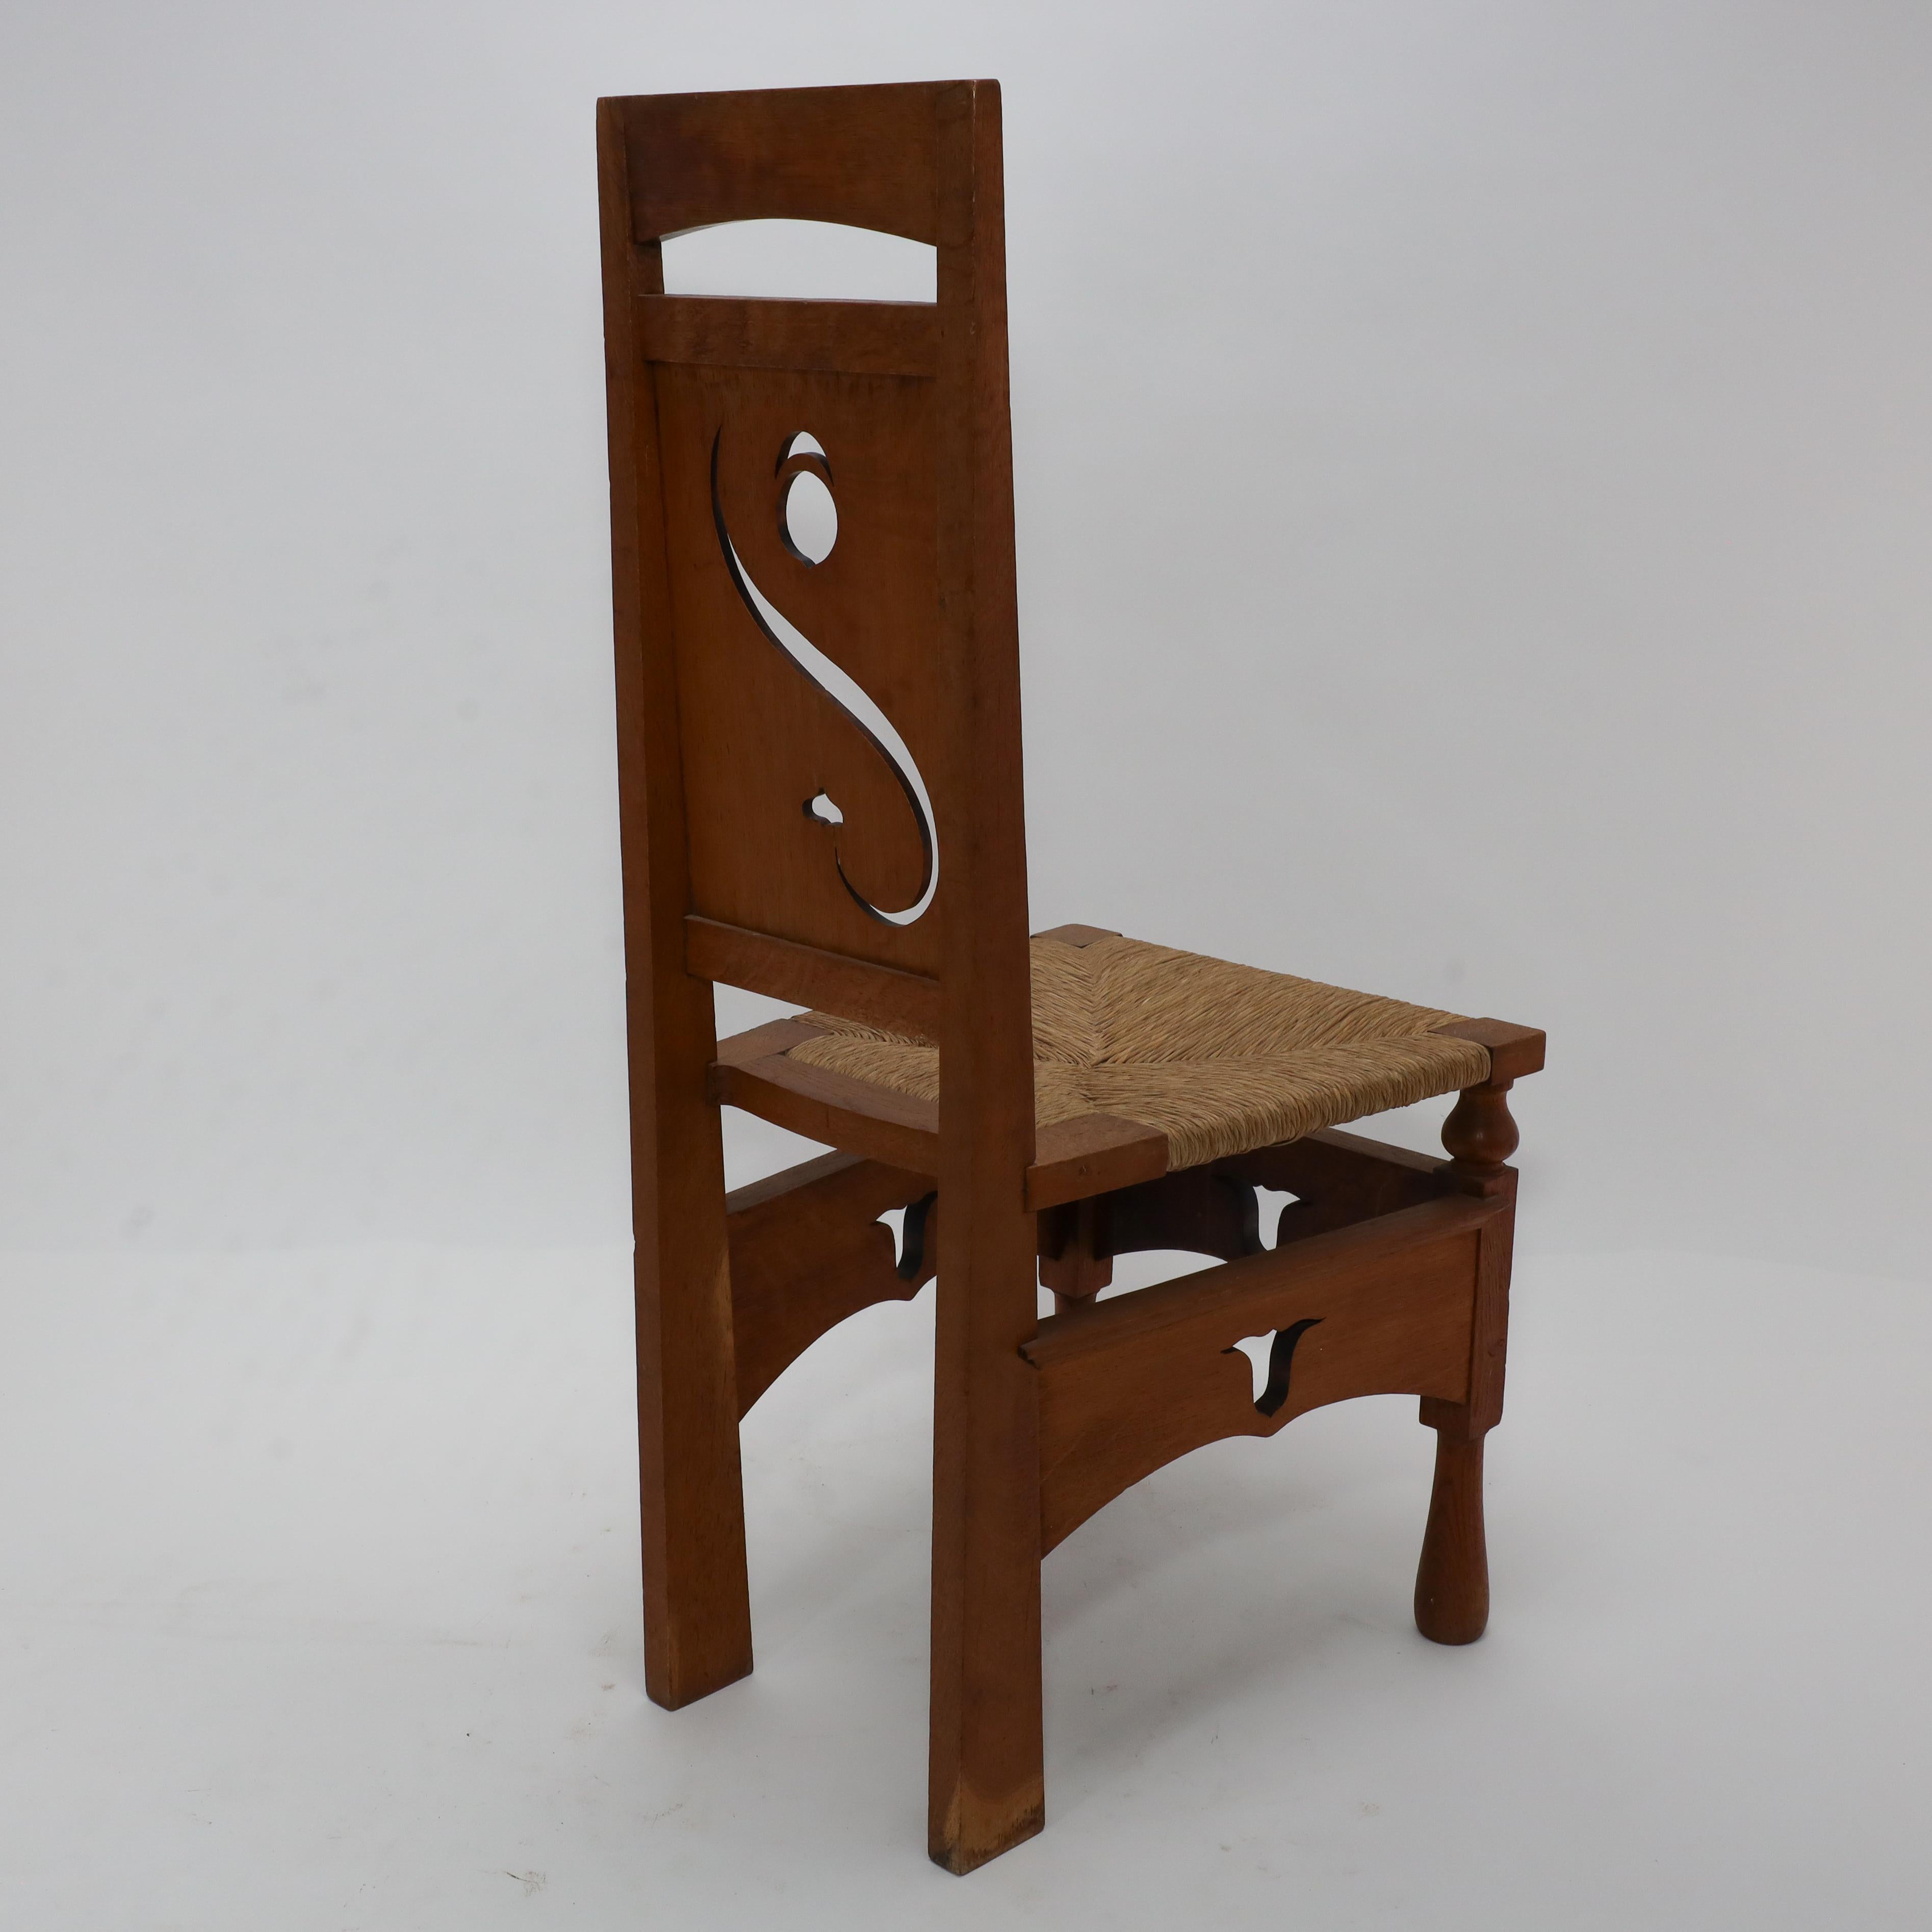 M H Baillie Scott attri An Arts & Crafts Oak Chair With Stylised Floral Cut-Outs For Sale 11